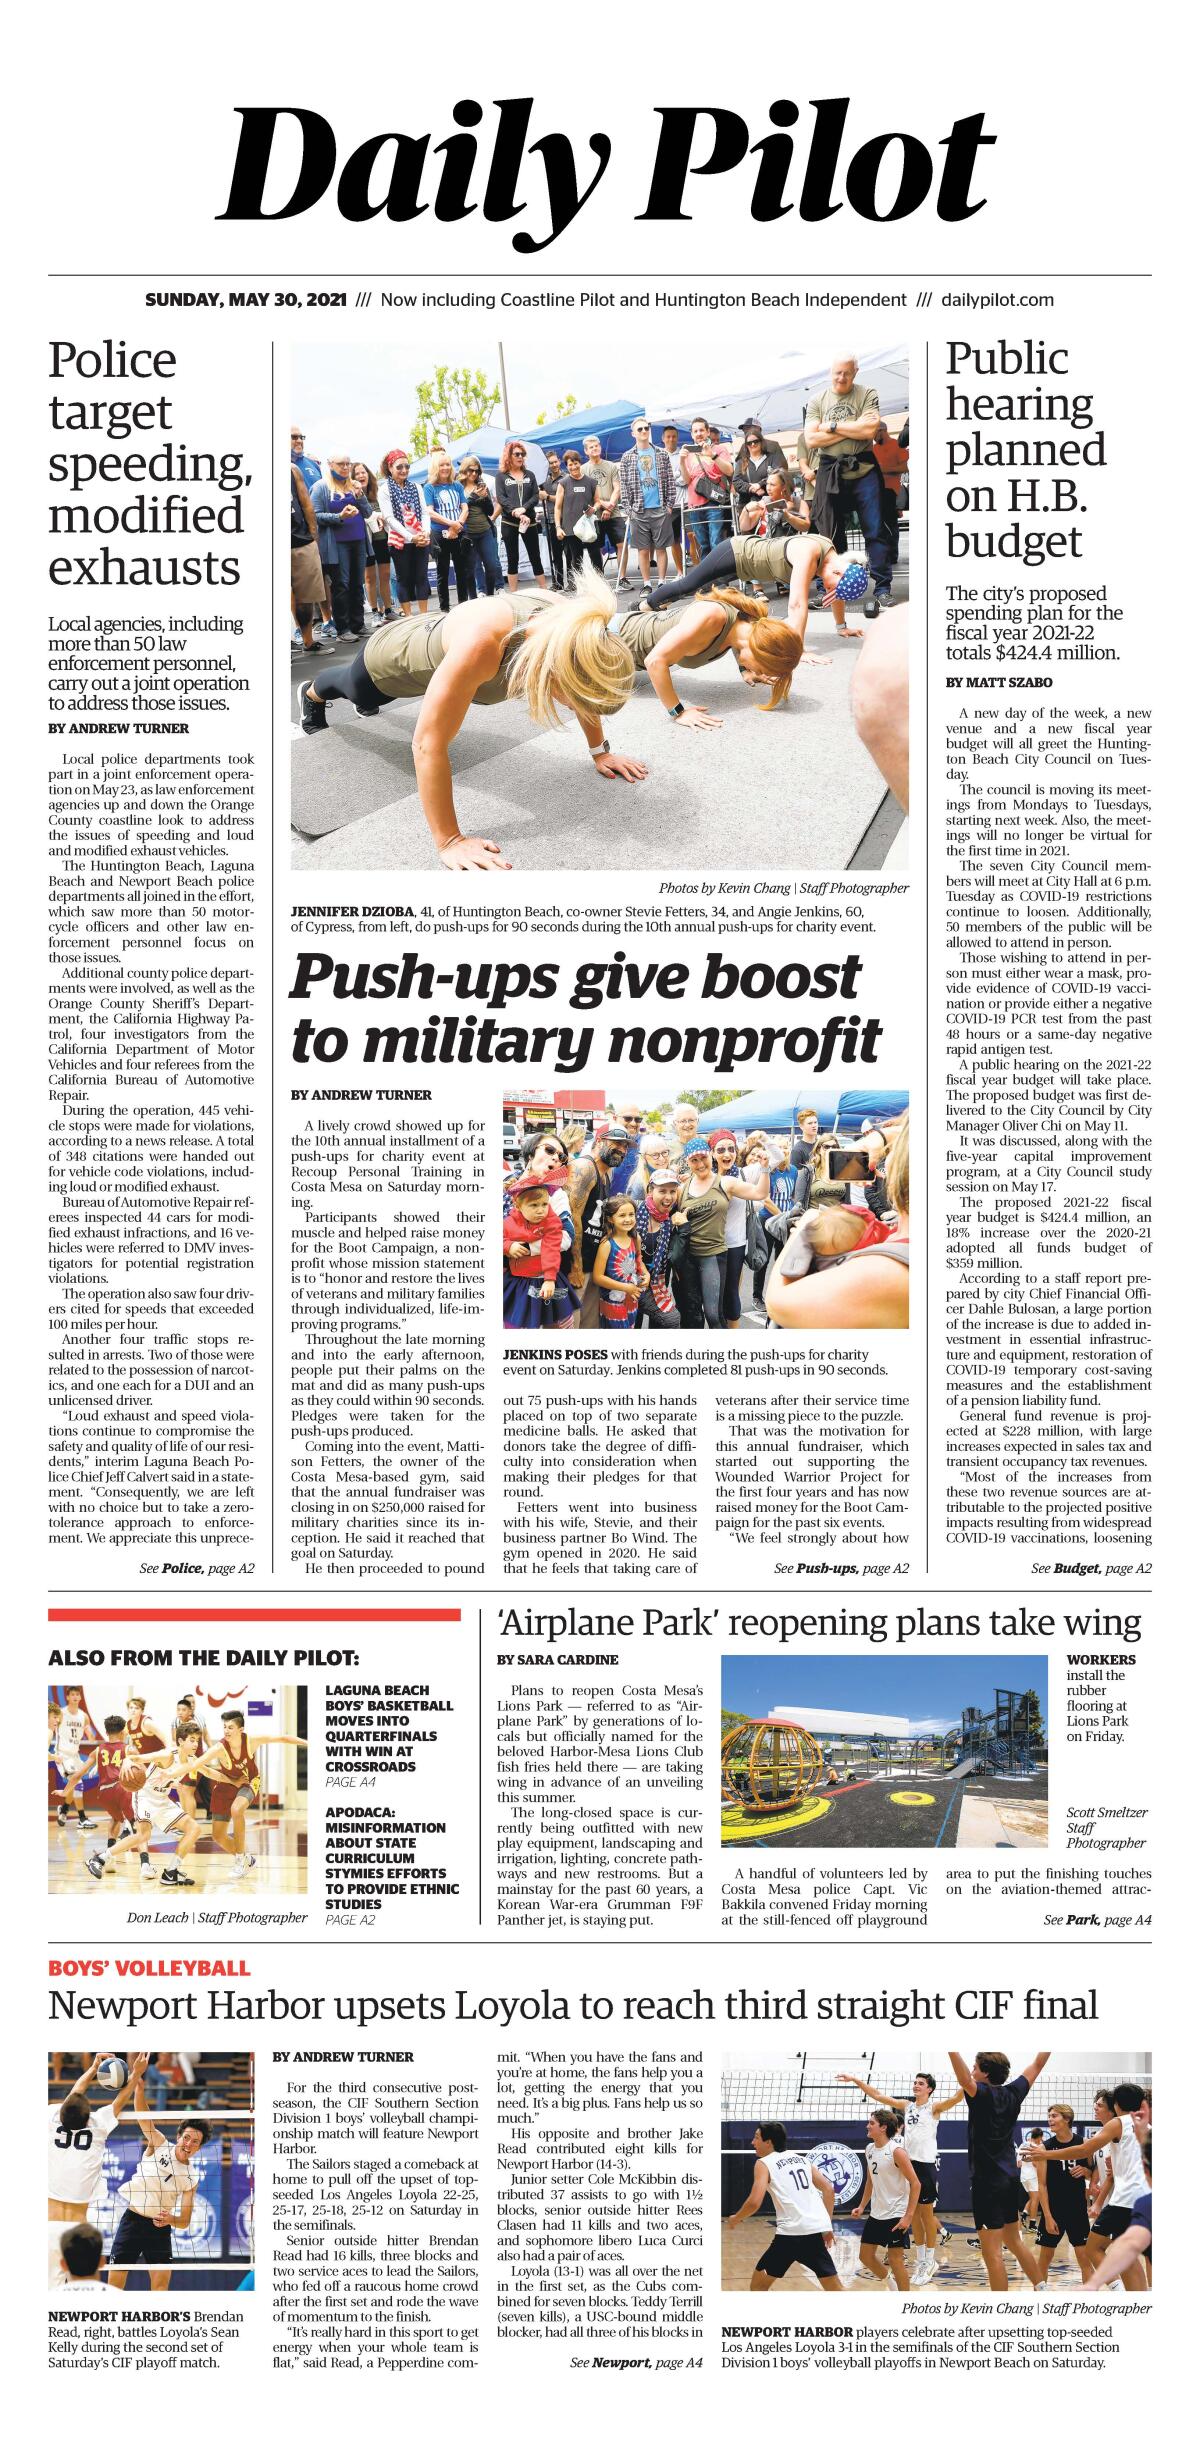 Front page of Daily Pilot e-newspaper for Sunday, May 30, 2021.